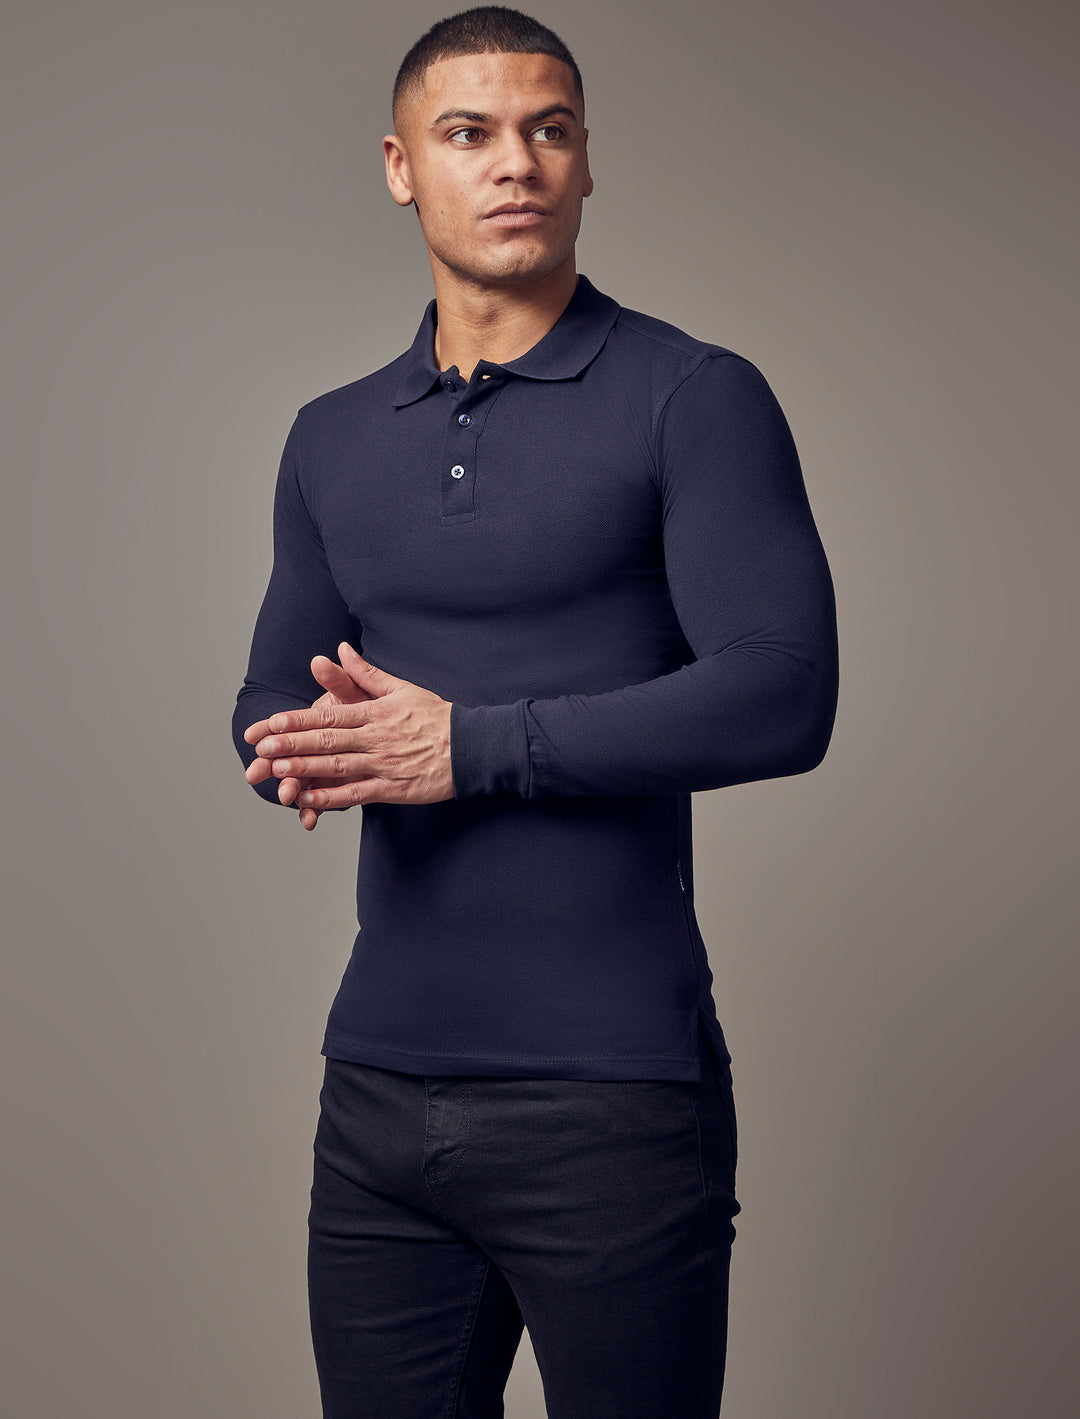  Navy muscle-fit polo shirt from Tapered Menswear, emphasizing its tapered design and high-quality craftsmanship.